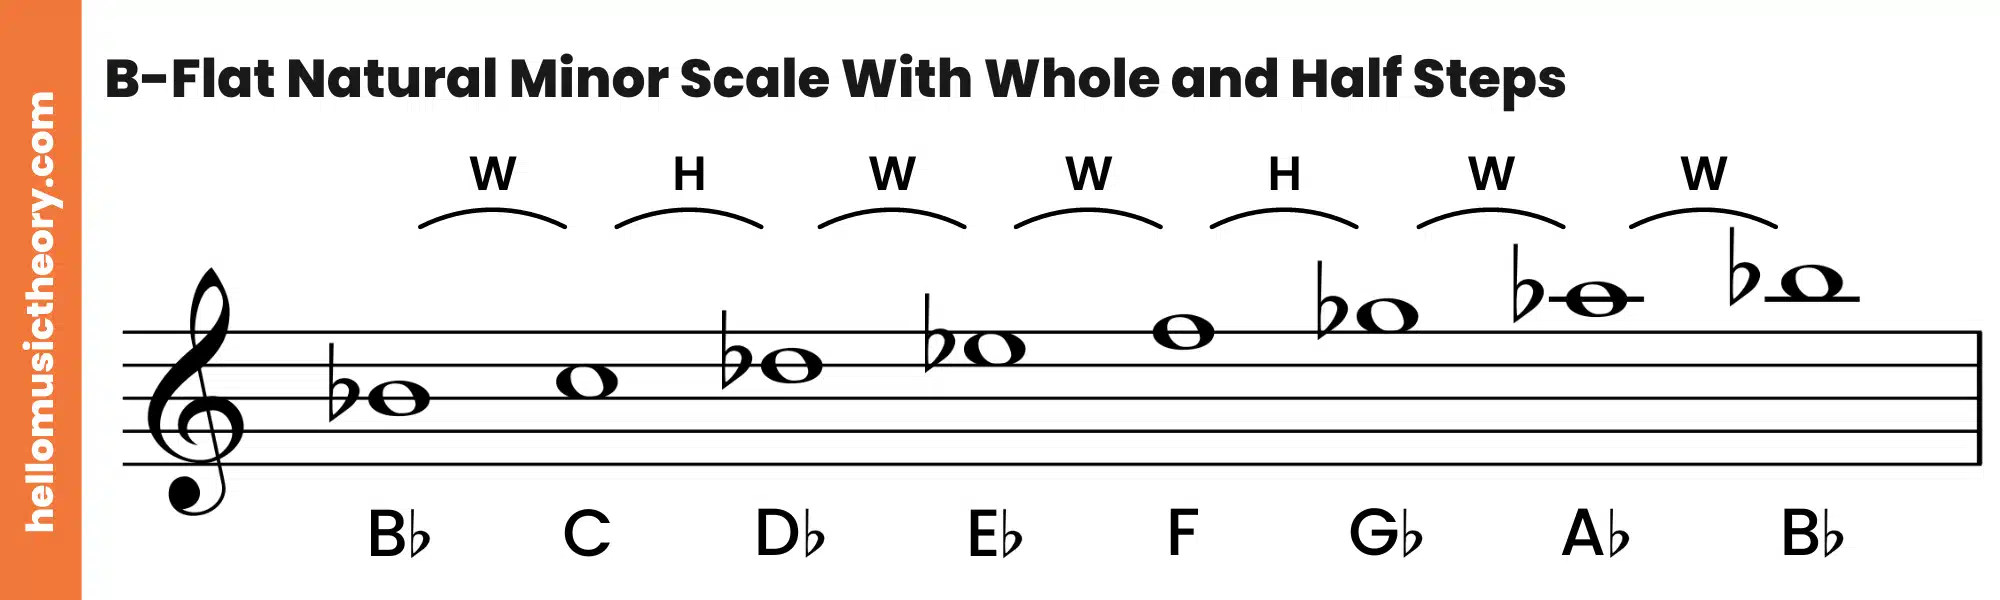 B-Flat Natural Minor Scale Treble Clef Ascending With Whole and Half Steps